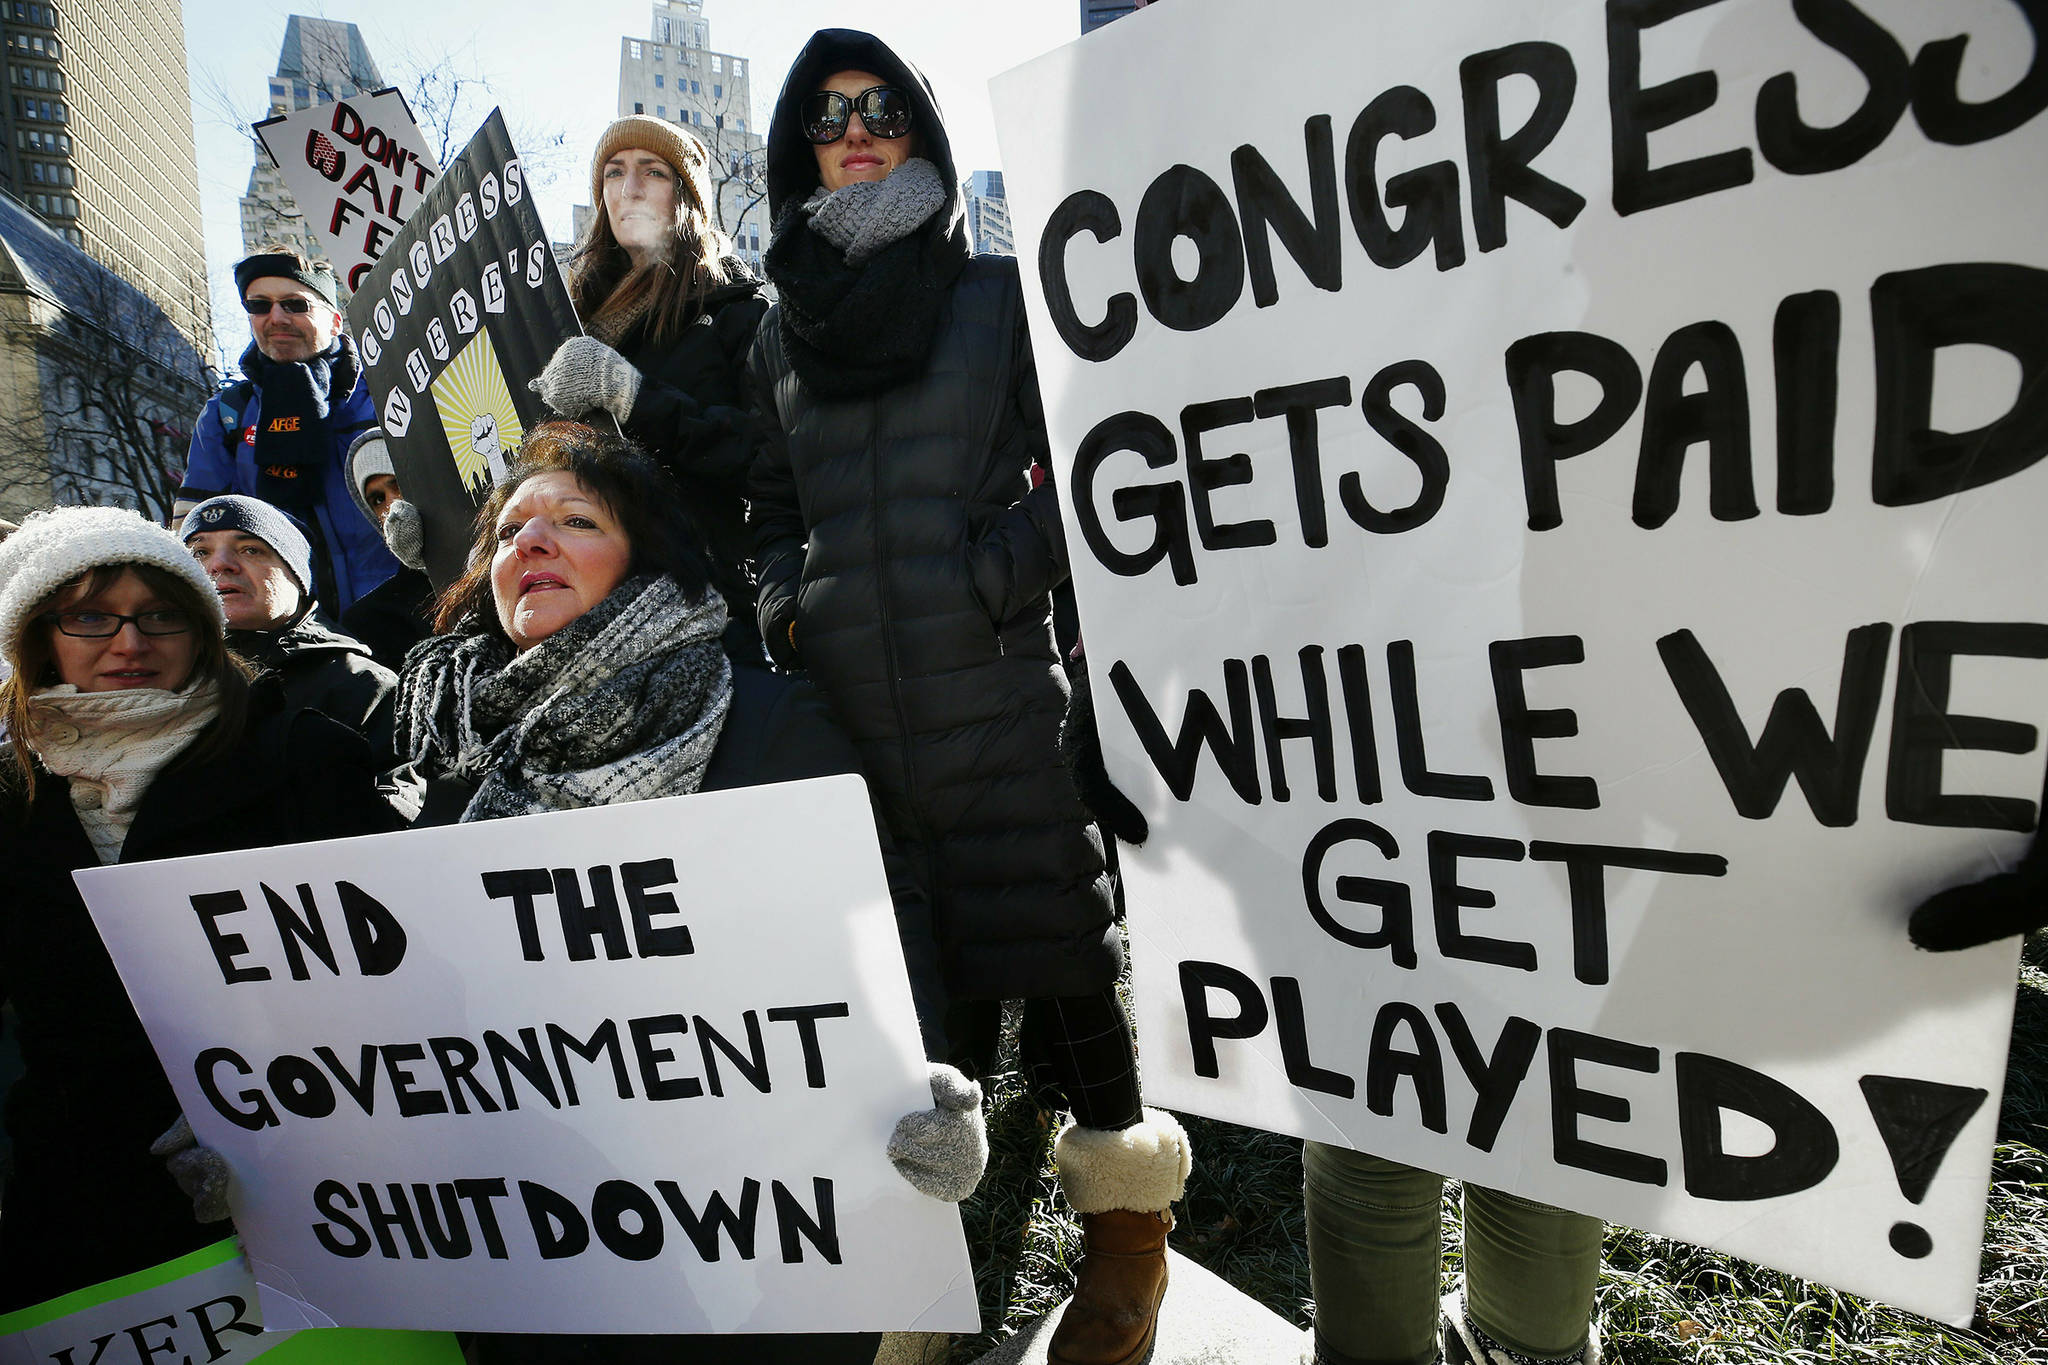 Government workers and their supporters hold signs during a protest in Boston, Friday, Jan.11, 2019. The workers rallied with Democratic U.S. Sen. Ed Markey and other supporters to urge that the Republican president put an end to the shutdown so they can get back to work. (AP Photo/Michael Dwyer)